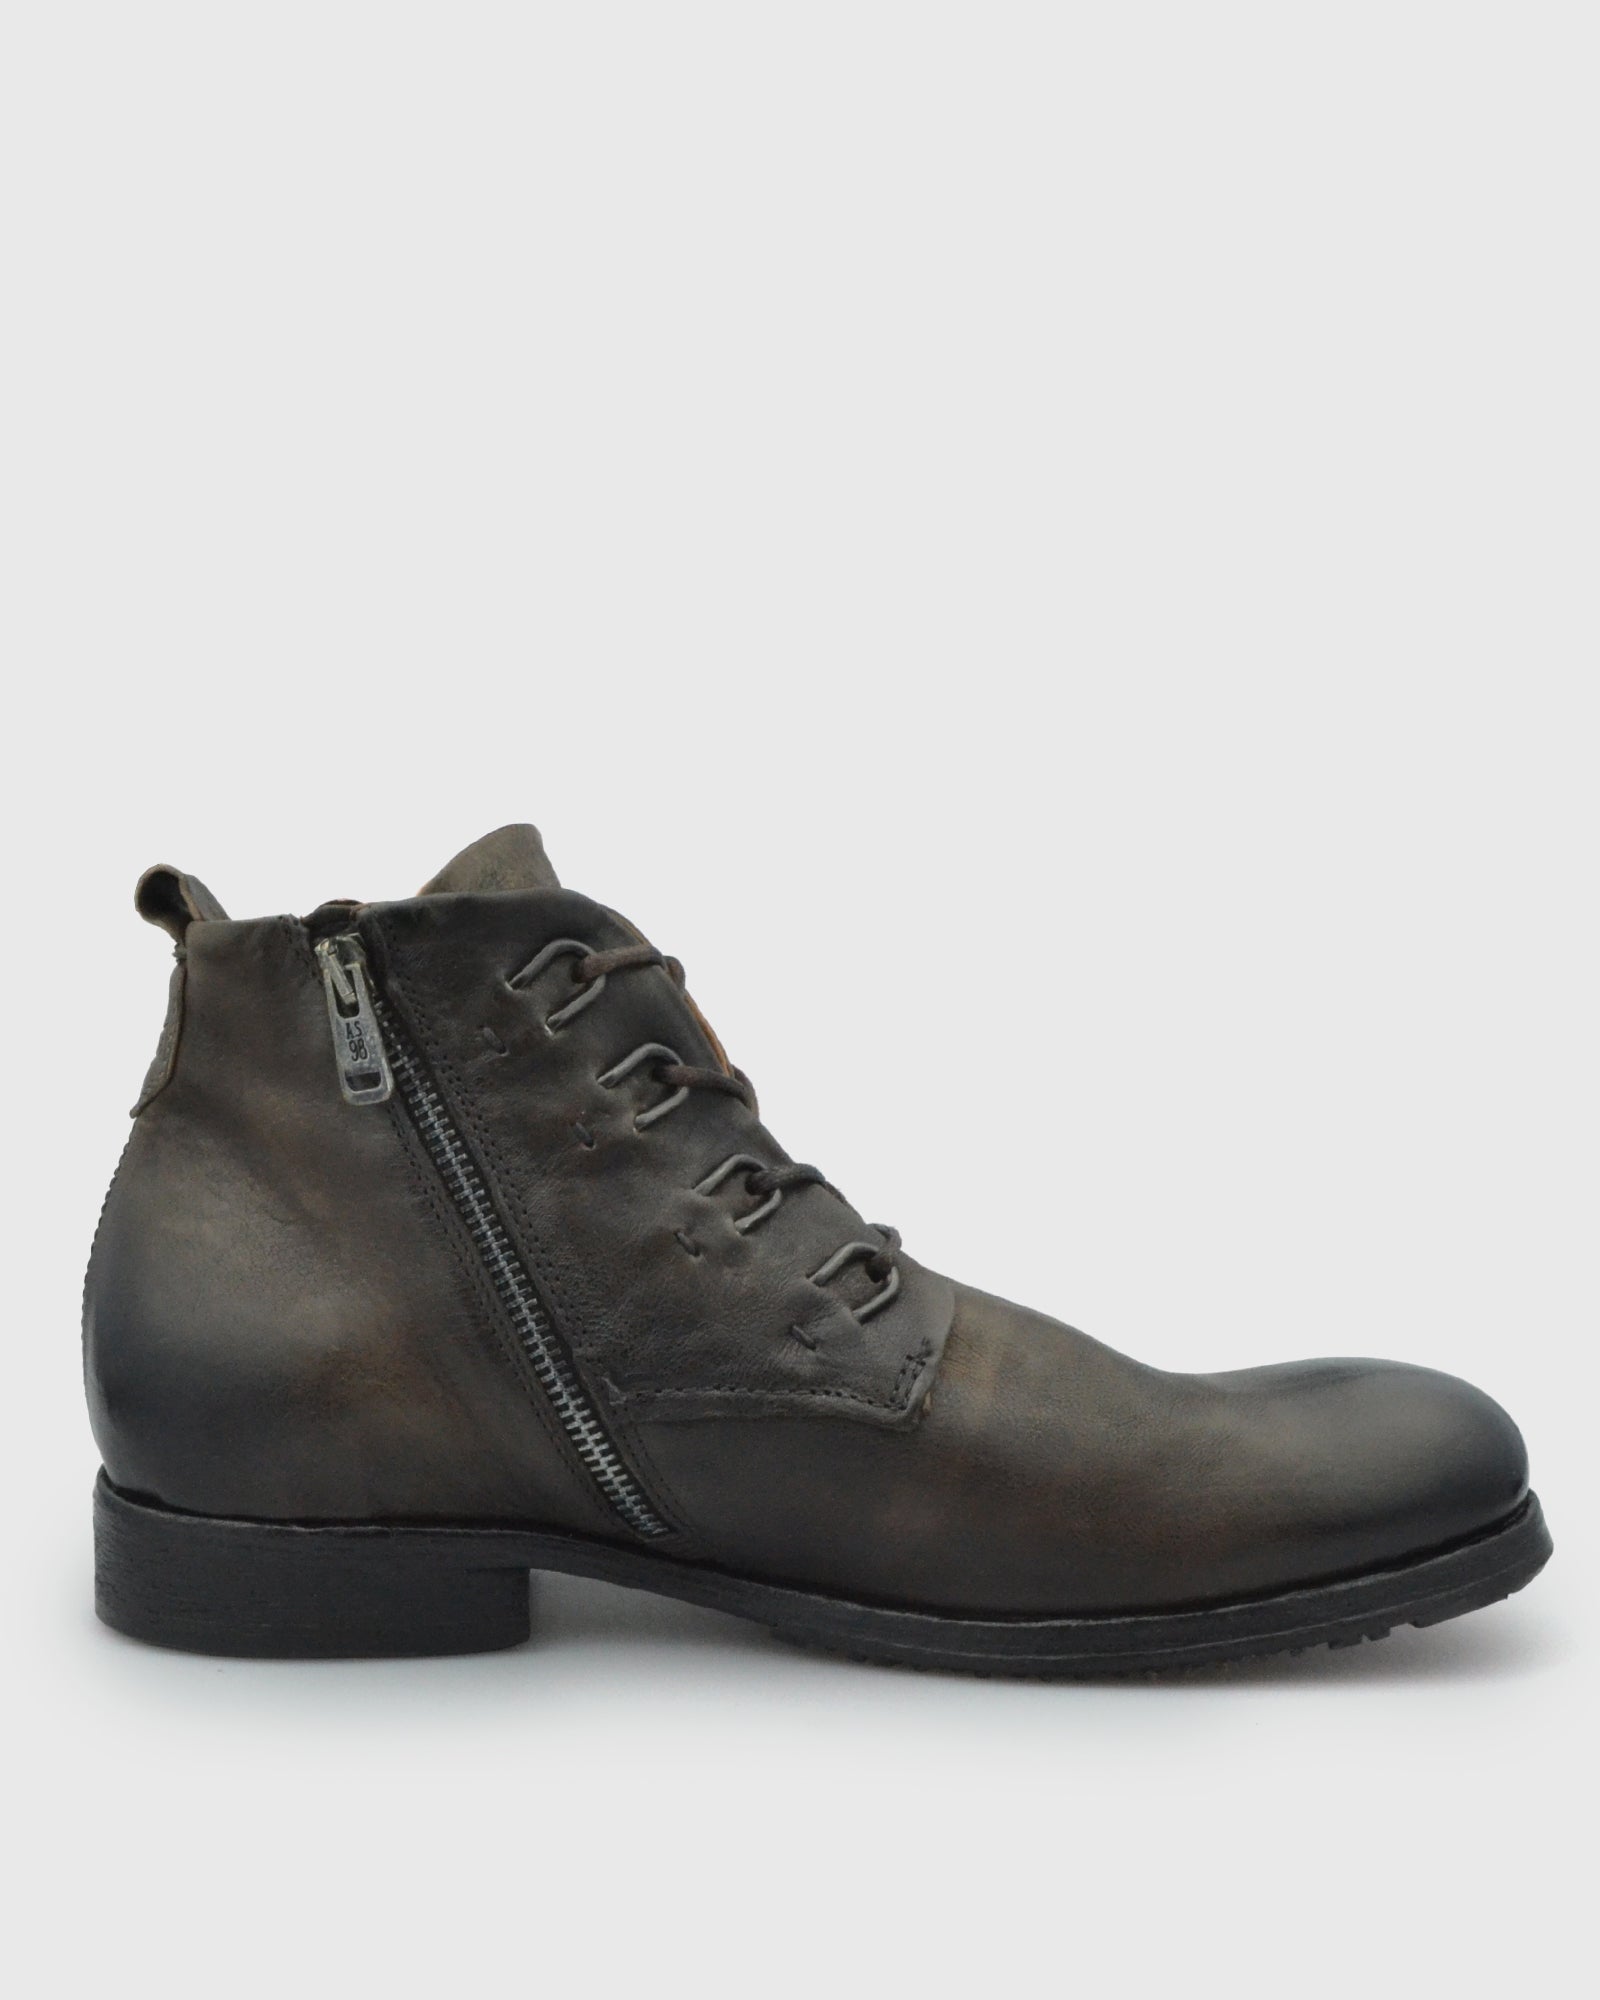 AS98 401236AS98 BROWN BOOT